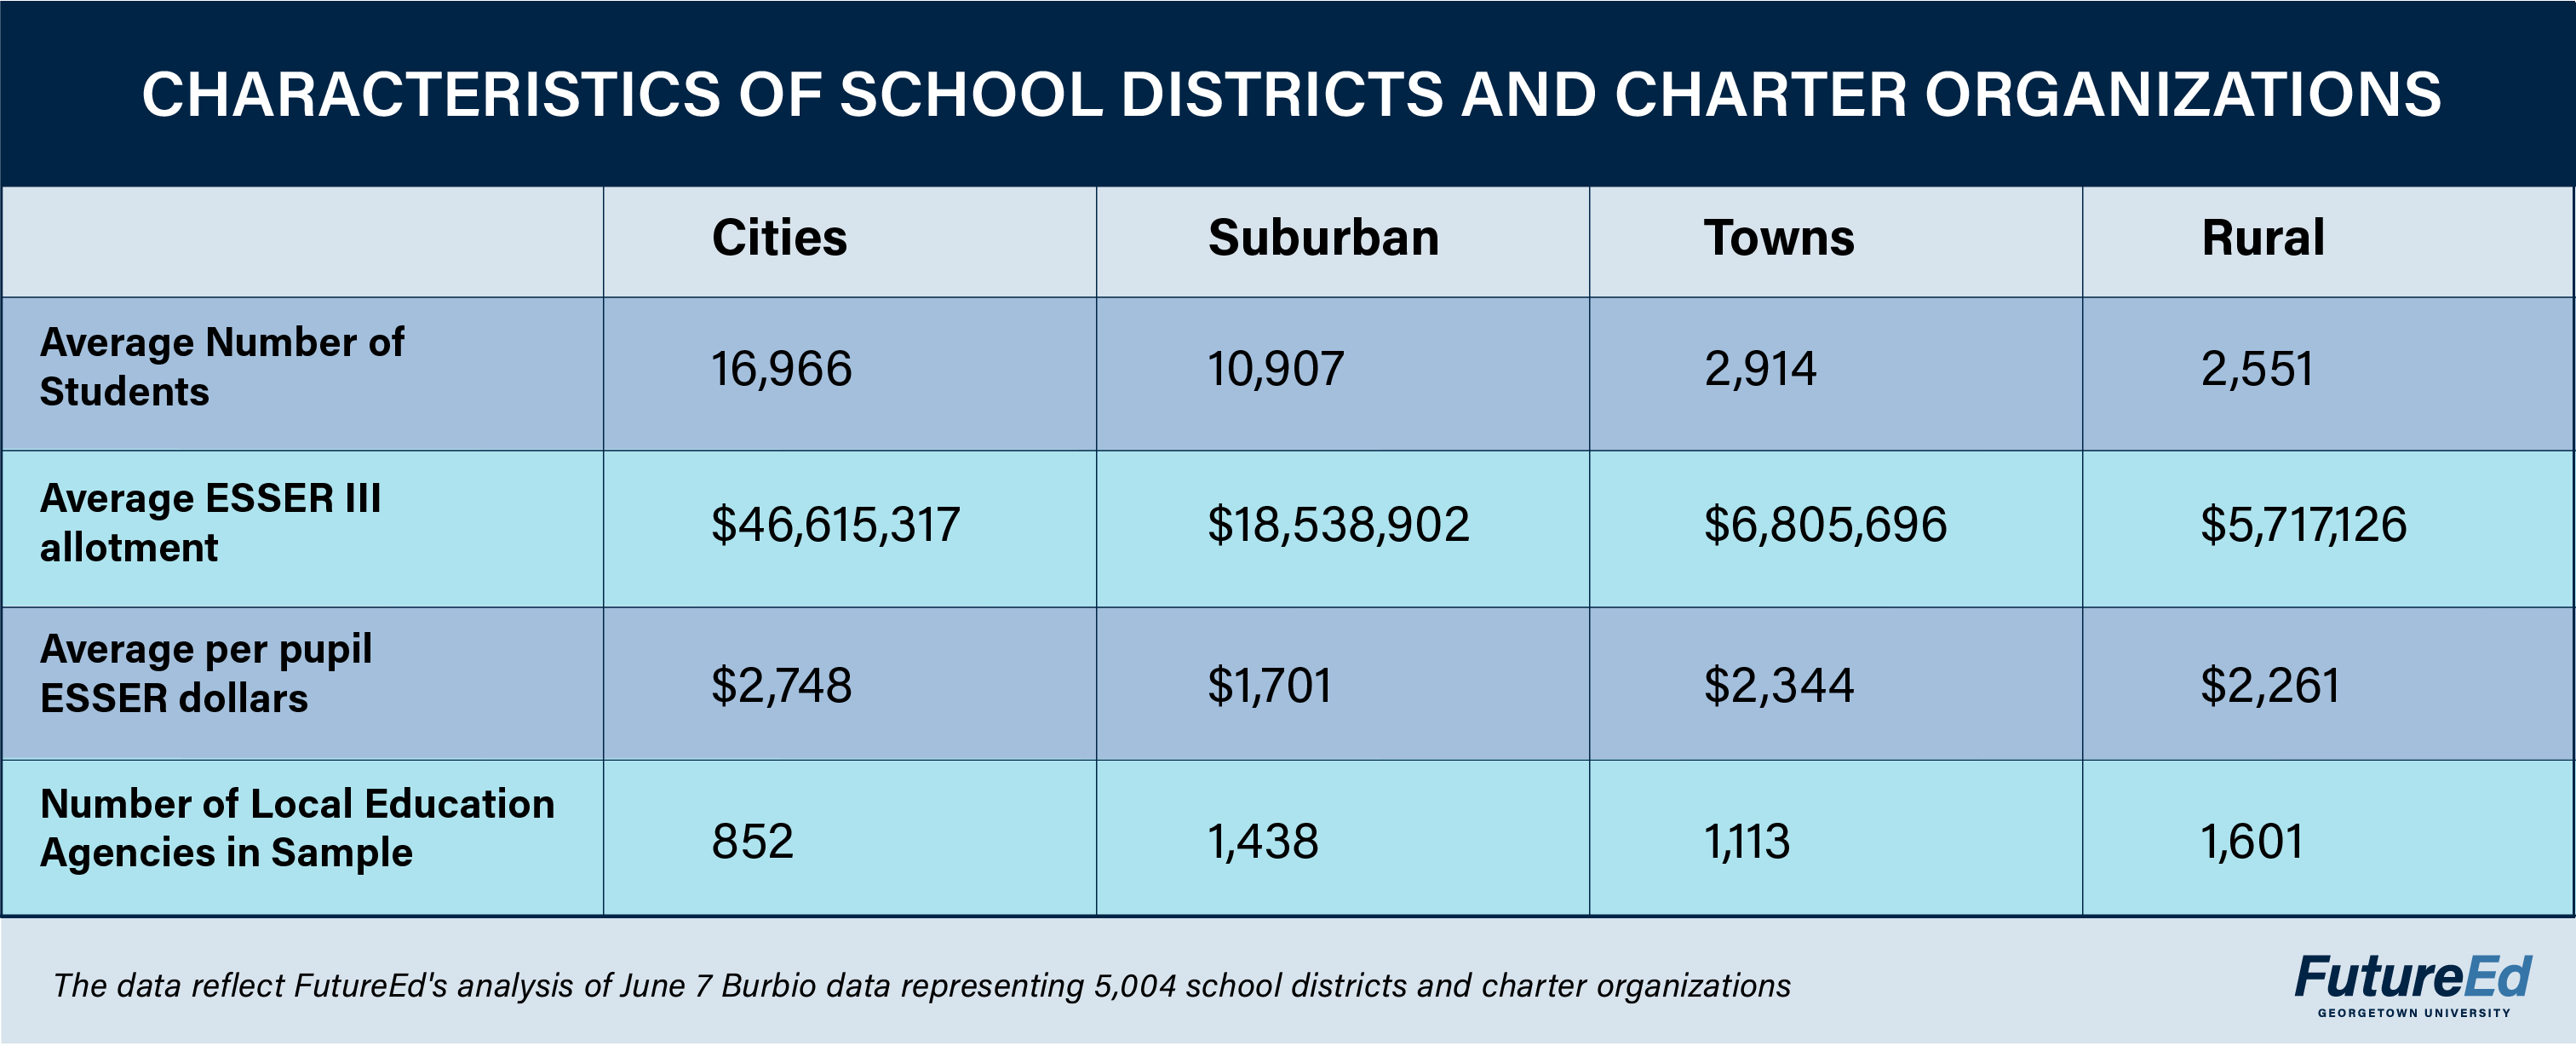 Chart: Characteristics of School Districts and Charter Organizations. Average number of students: cities 16,966; suburban 10,907; towns 2,914; rural 2,551. Average ESSER III allotment: cities $46,615,317; suburban $18,538,902; towns $6,805,696; rural $5,717,126. Average per pupil ESSER dollars: cities $2,748; suburban $1,701; towns $2,344; rural $2,261. Number of Local Education Agencies in sample: cities 851; suburban 1,438; towns 1,113; rural 1,601. (The data reflect FutureEd's analysis of June 7 Burbio data representing 5,004 school districts and charter organizations.)